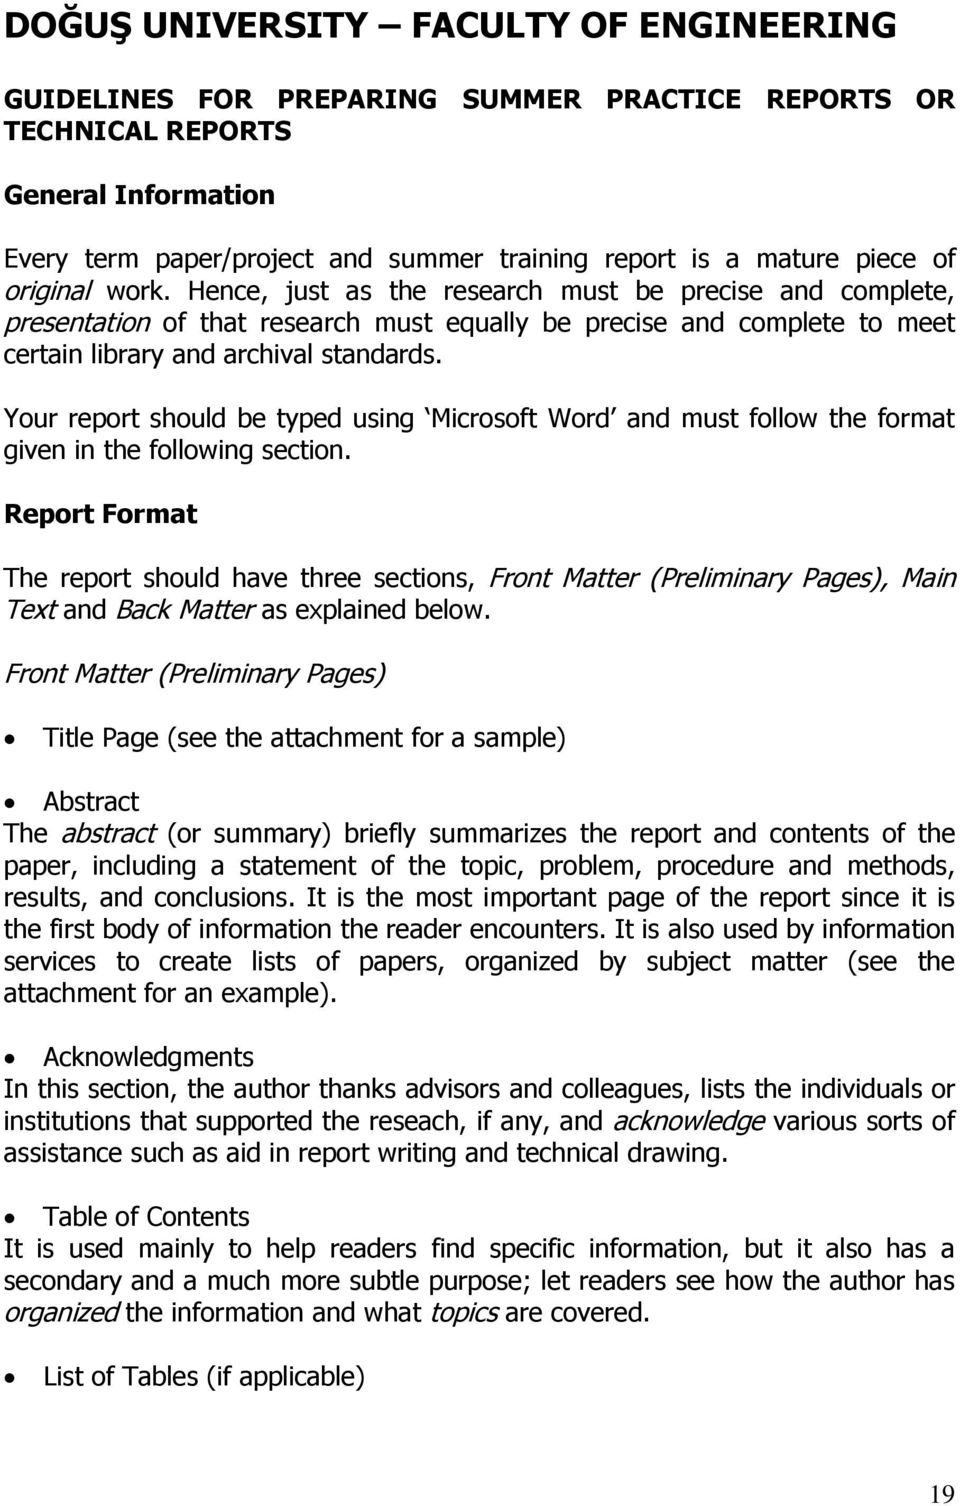 Your report should be typed using Microsoft Word and must follow the format given in the following section.